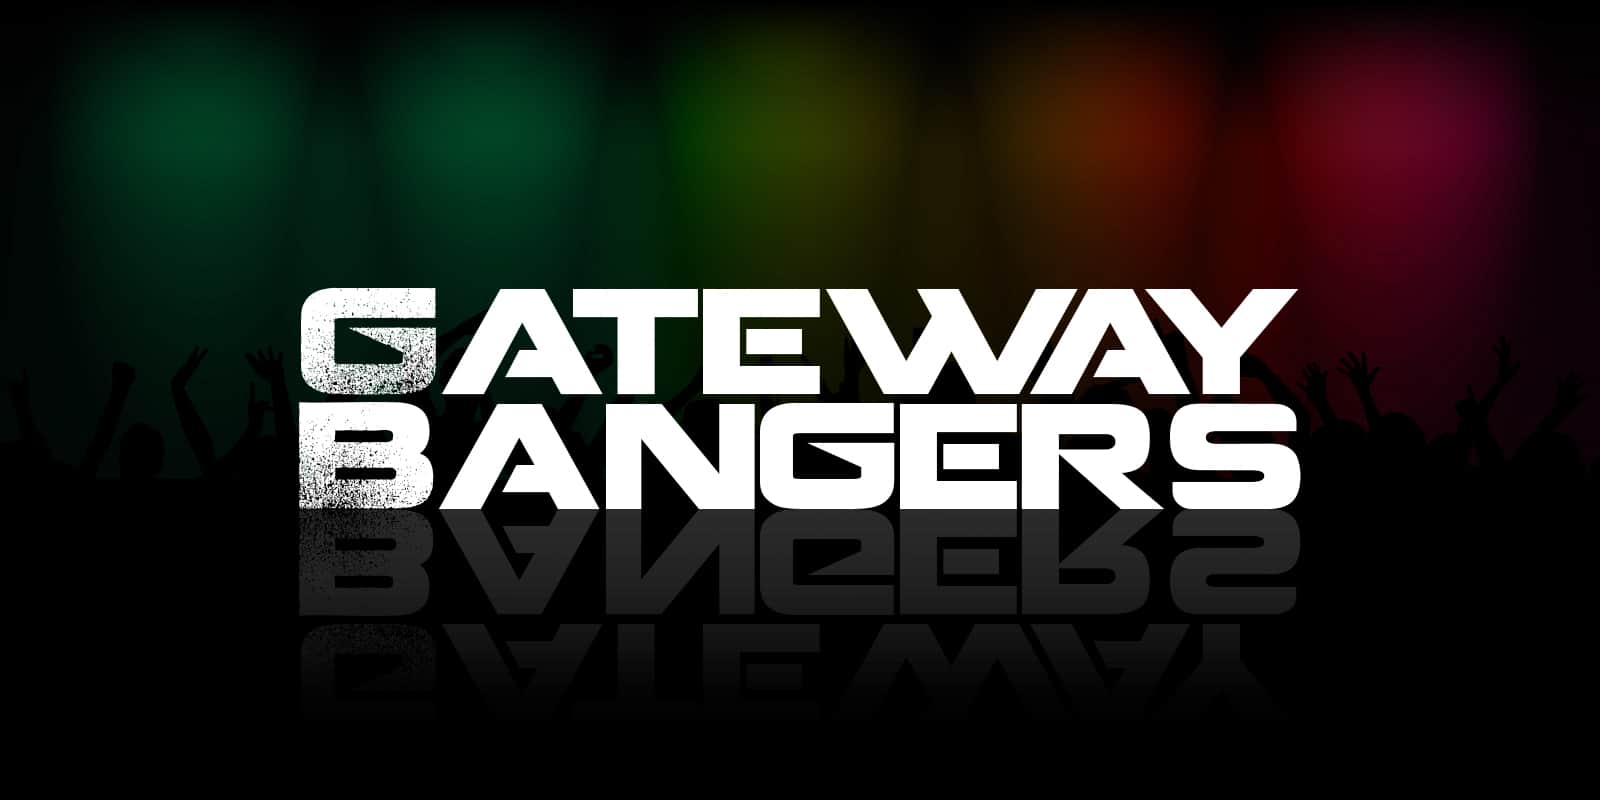 Featured image for “Gateway Bangers – 21st December”